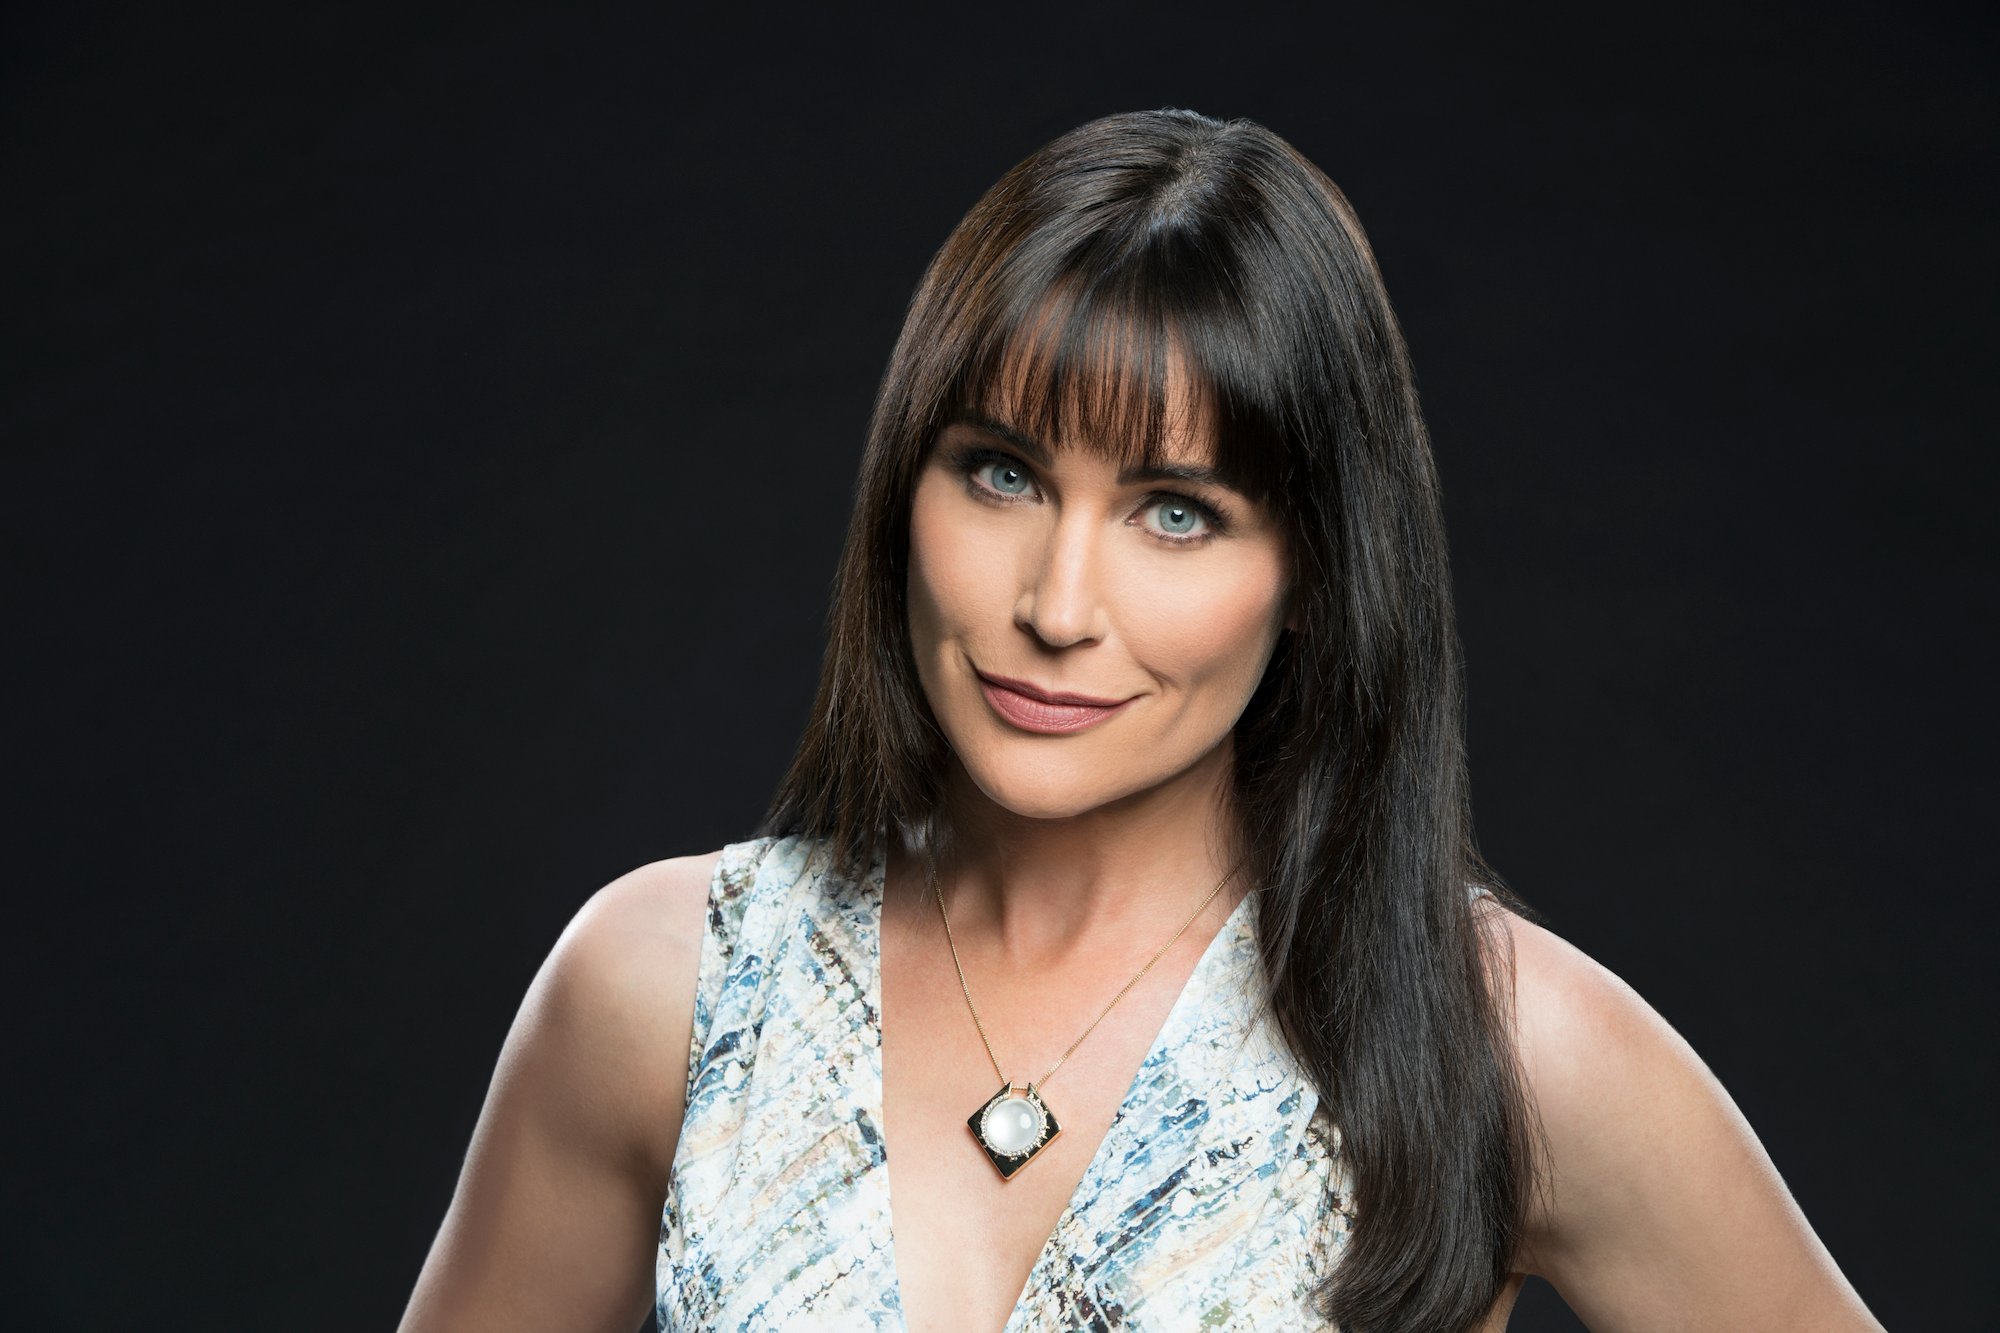 Rena Sofer of the CBS series THE BOLD AND THE BEAUTIFUL